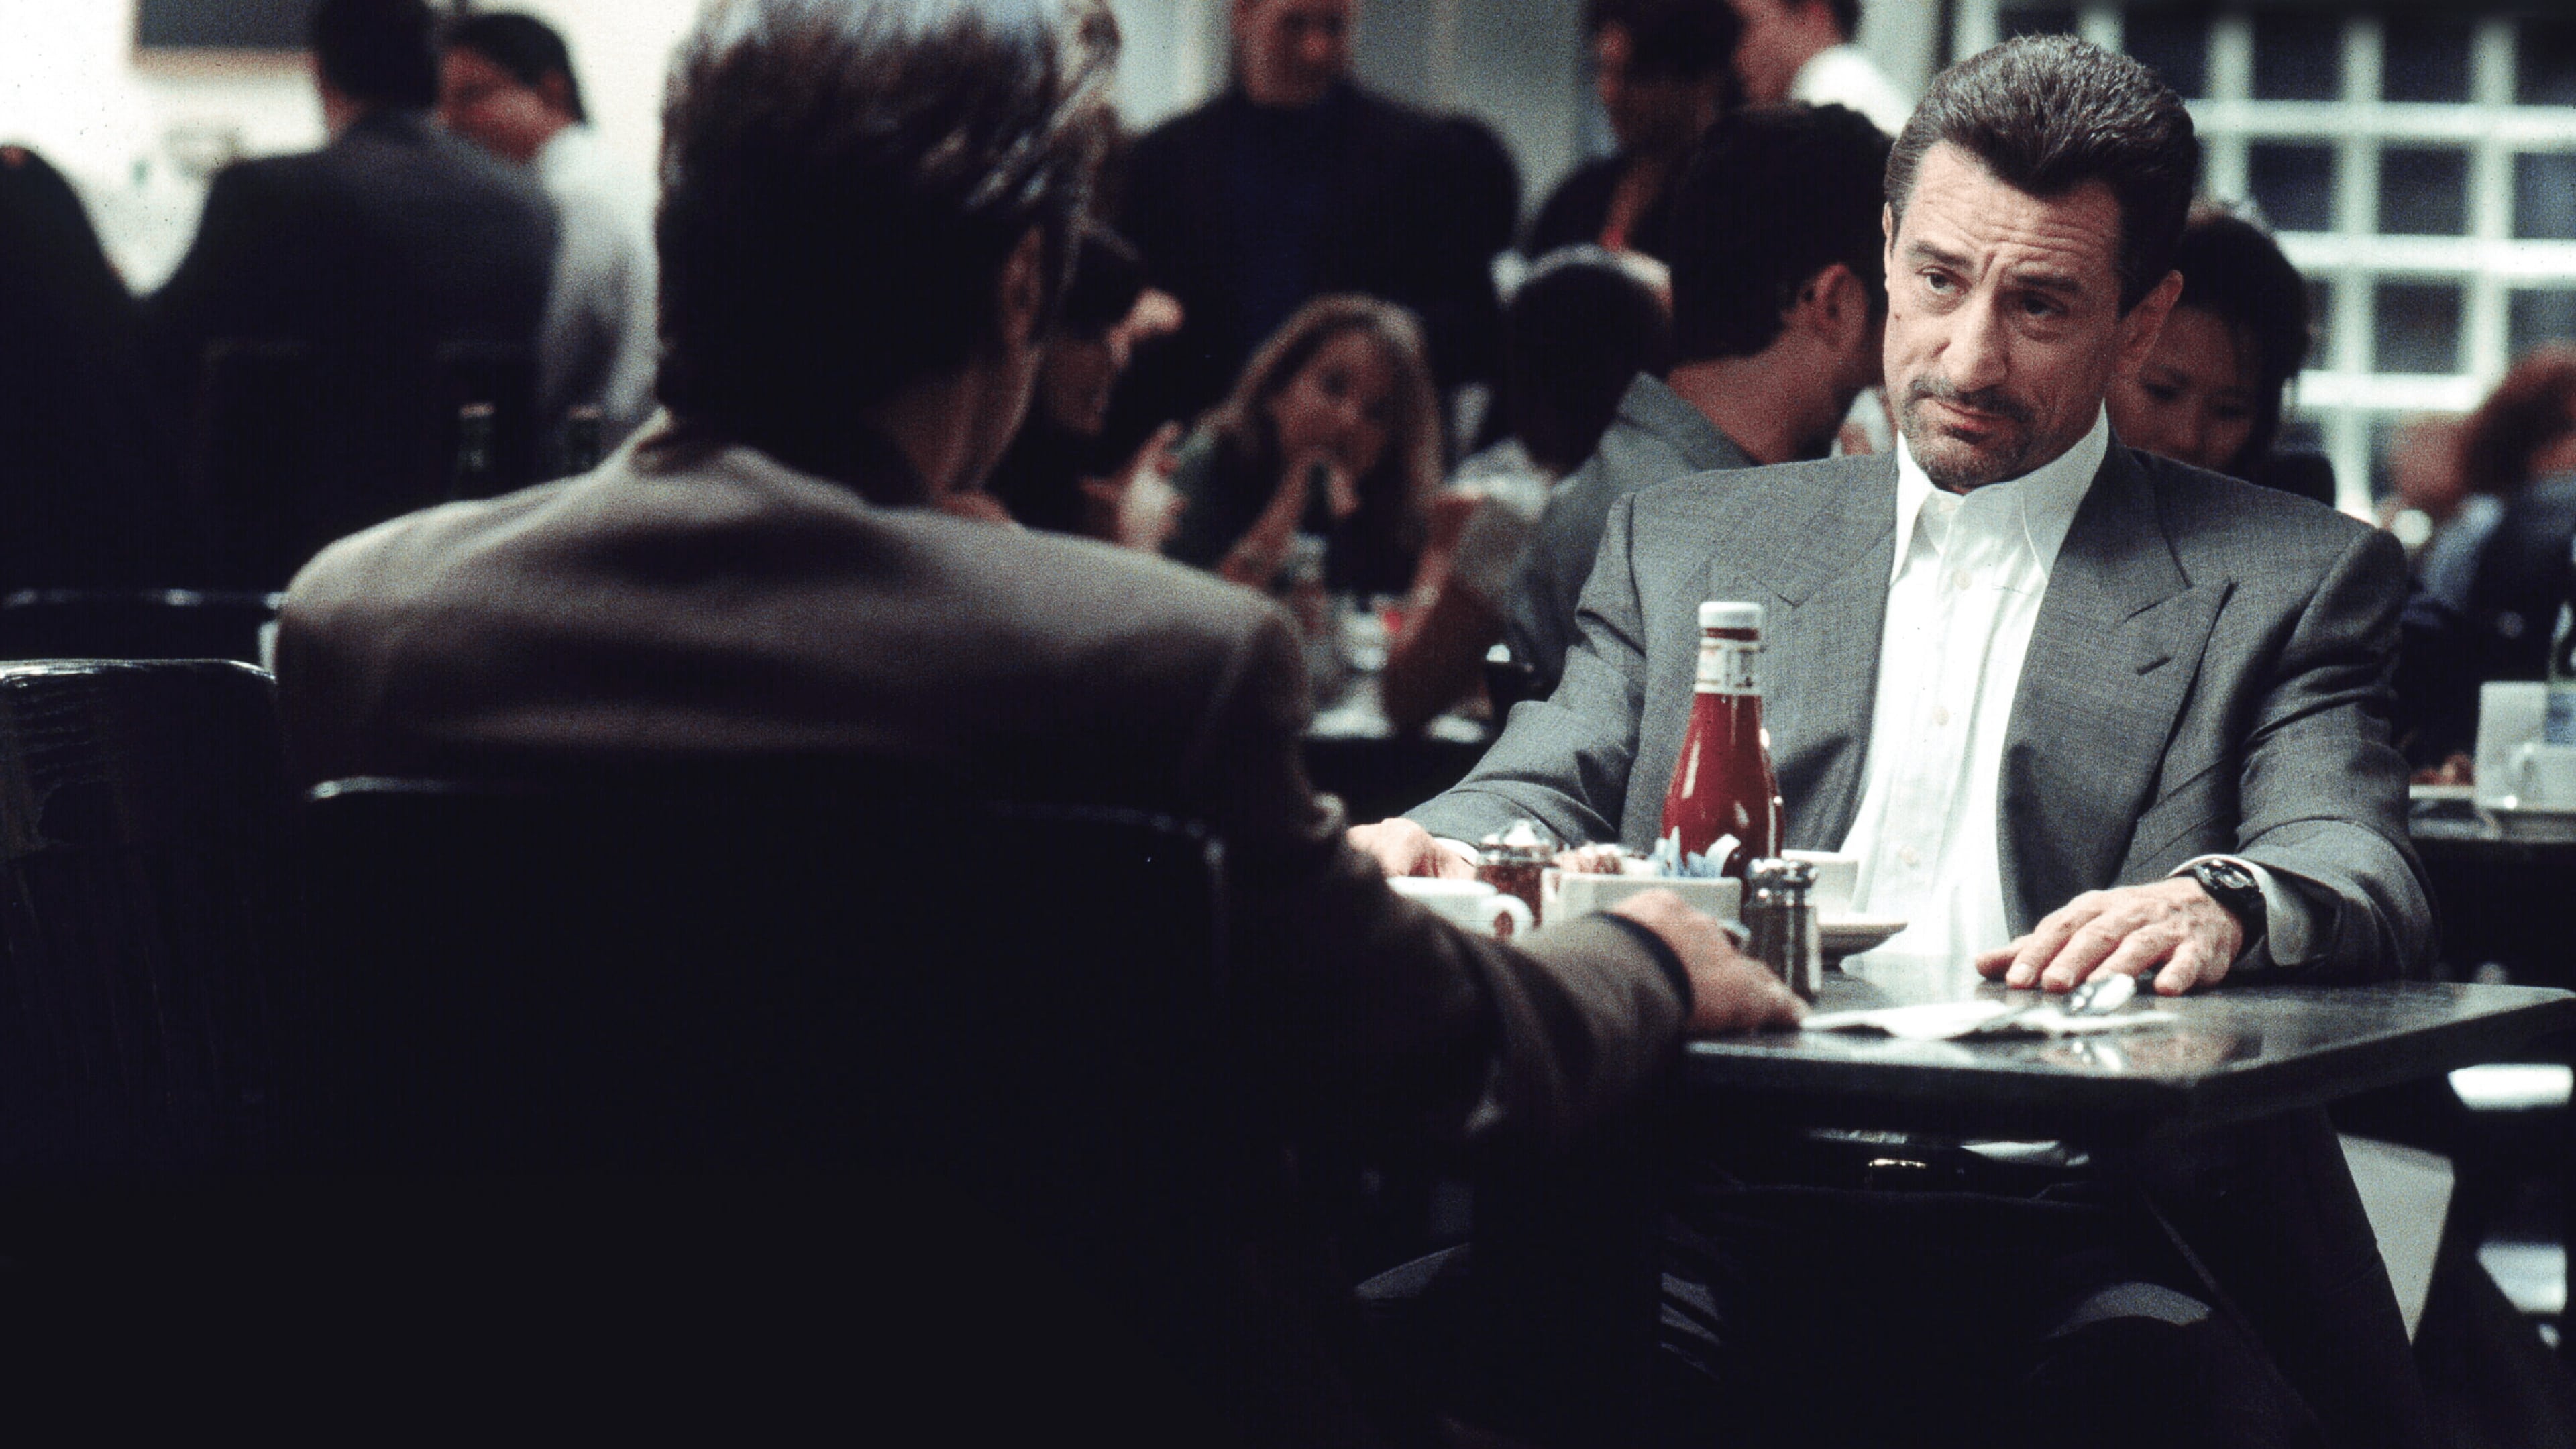 Screencap from the movie Heat showing two middle aged men in suits sitting opposite of each other in a restaurant. One of them has his back turned to the camera and we can't see his face.